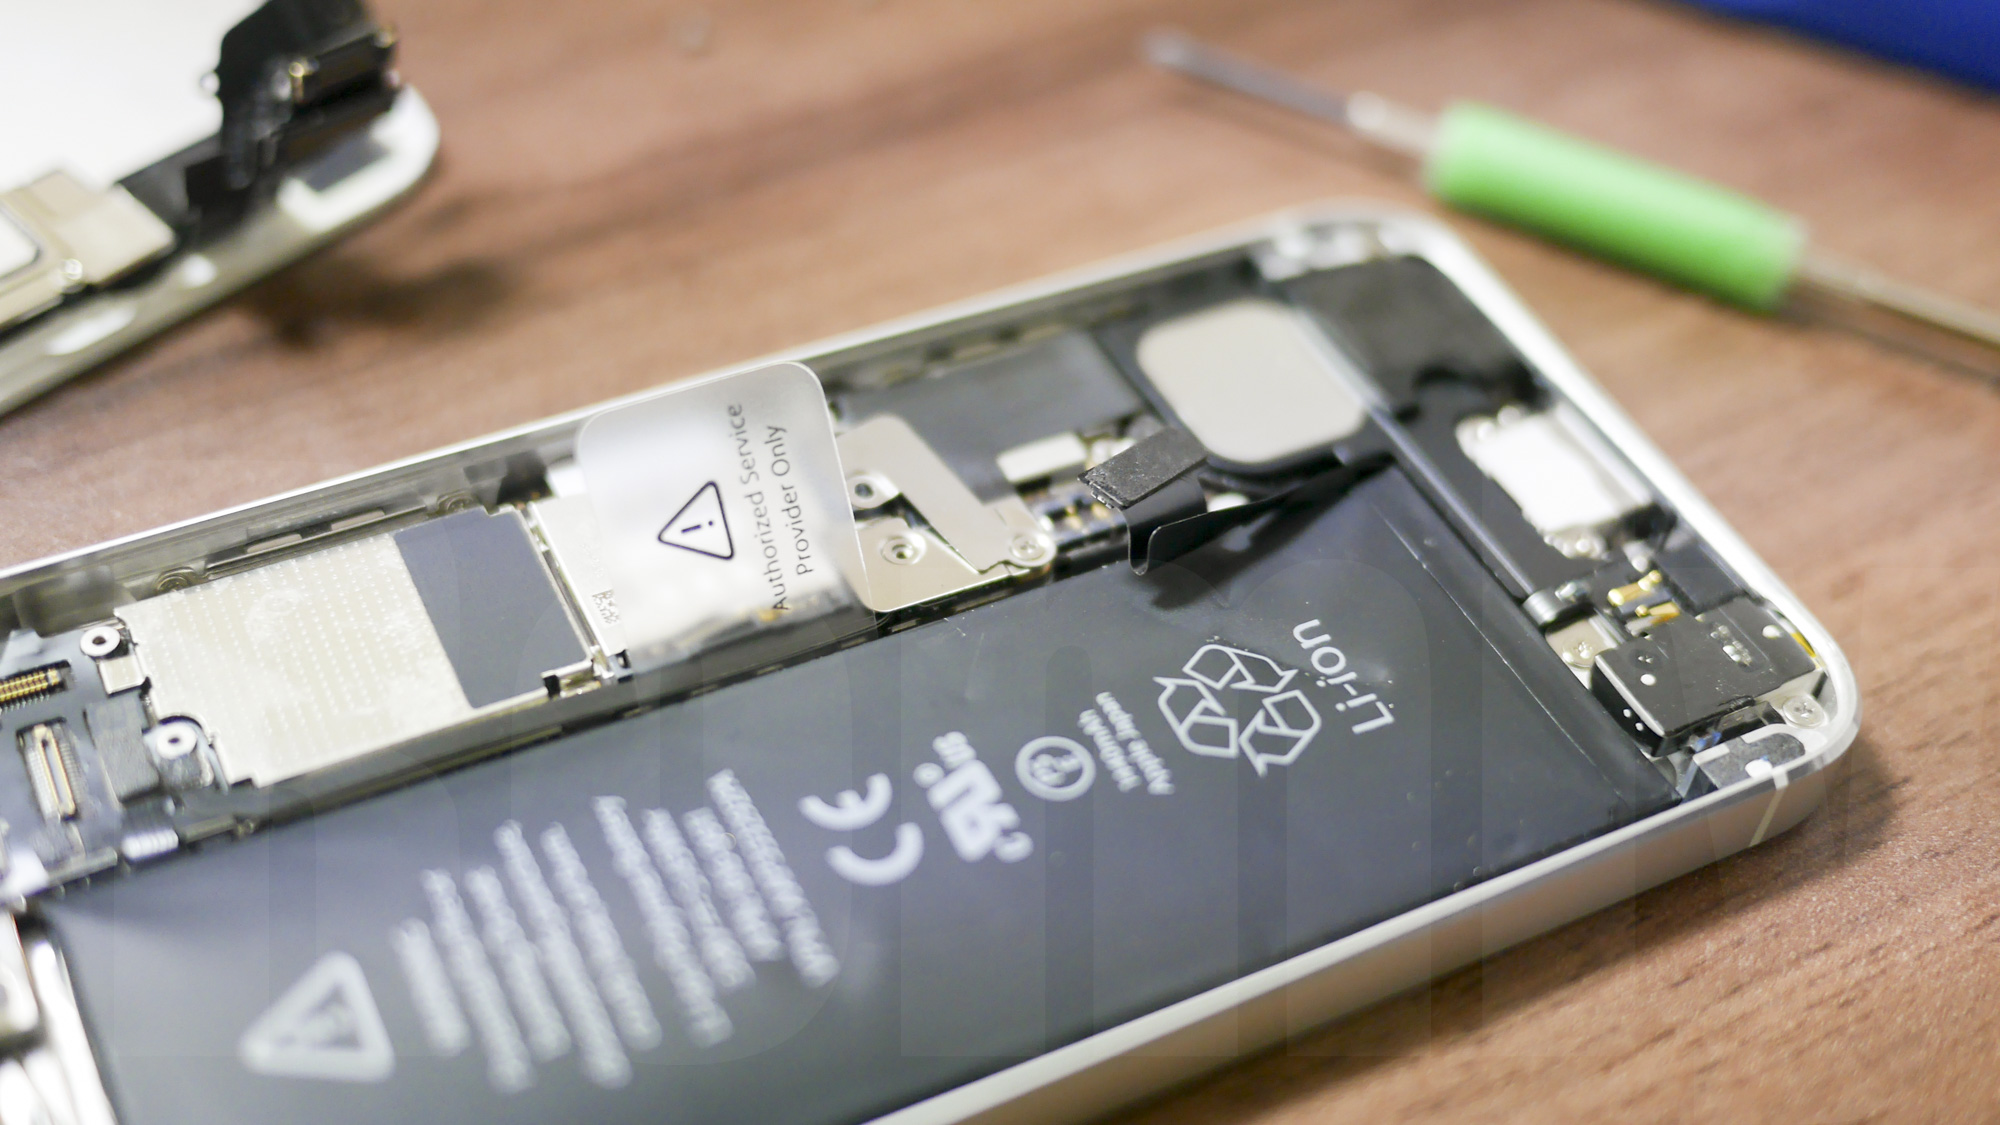 iPhone 5 Battery replacement: battery connector detached